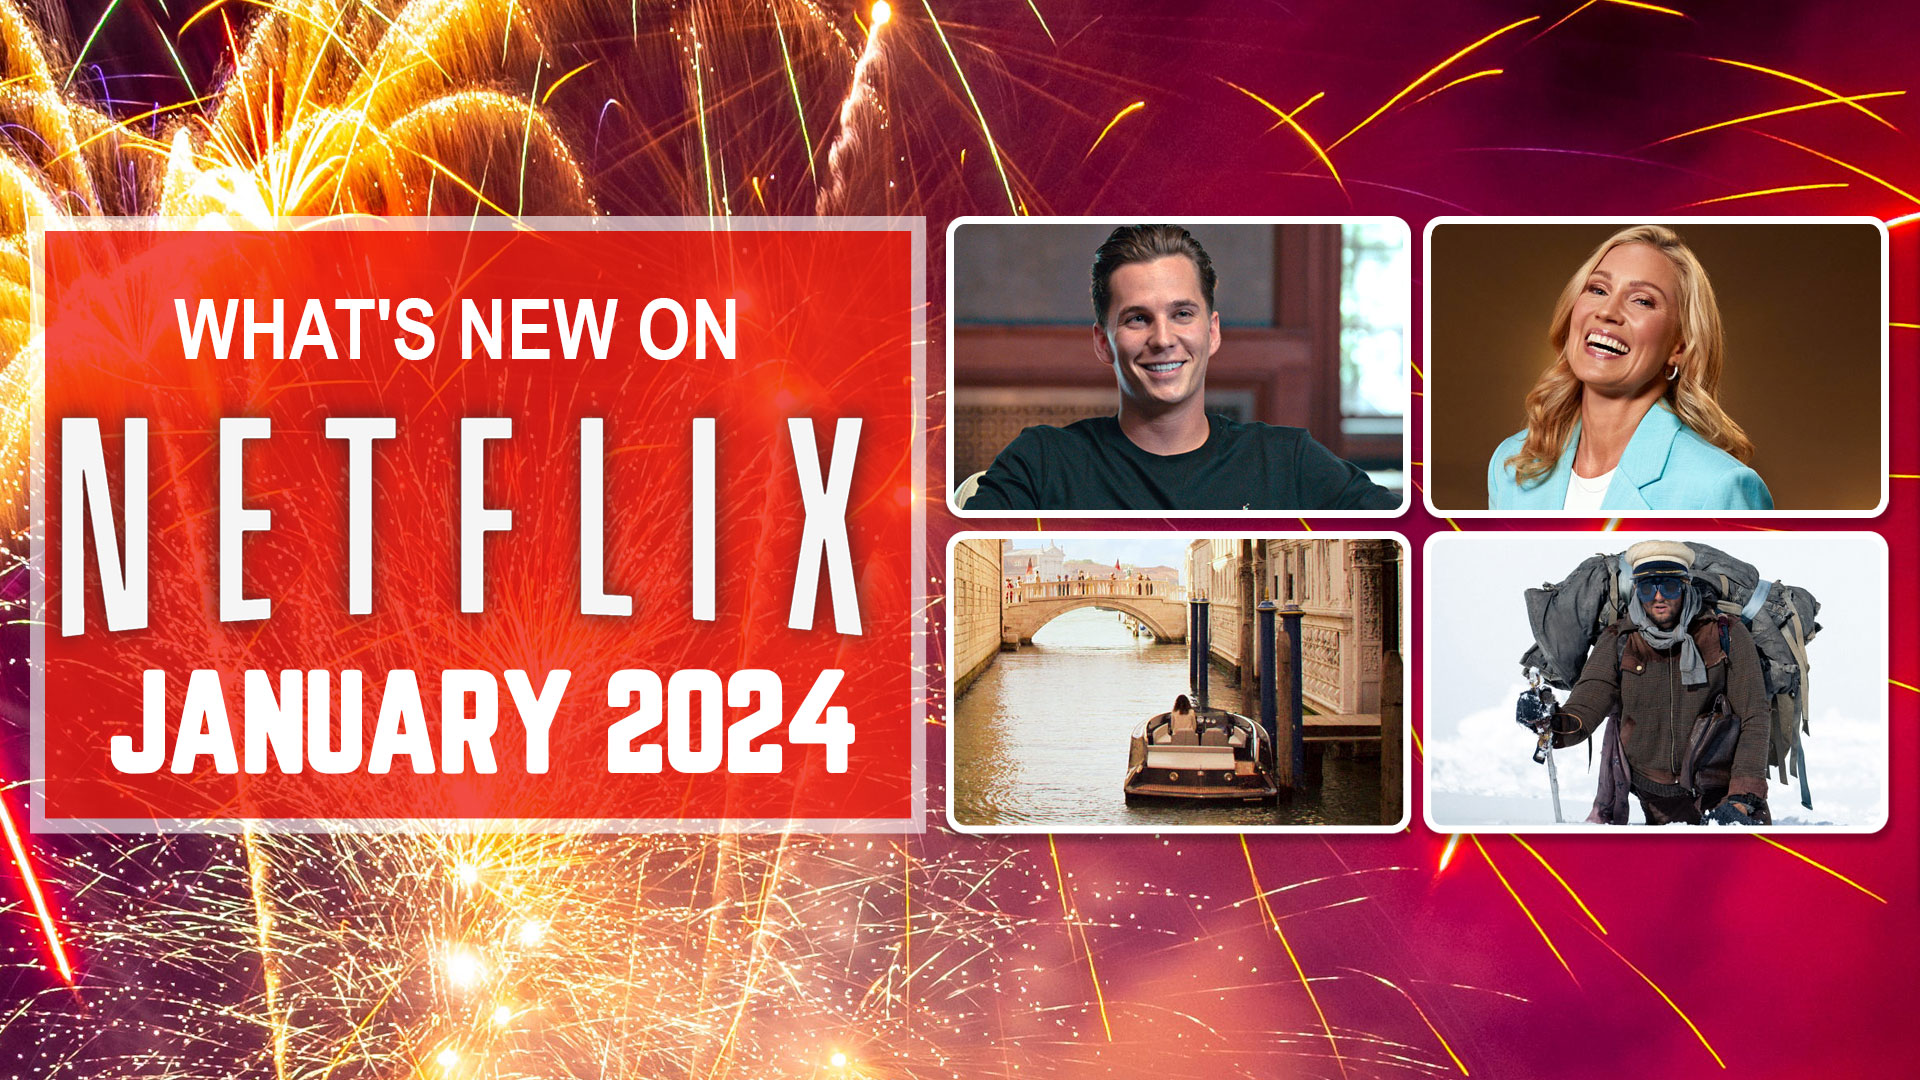 What's New on Netflix January 2024